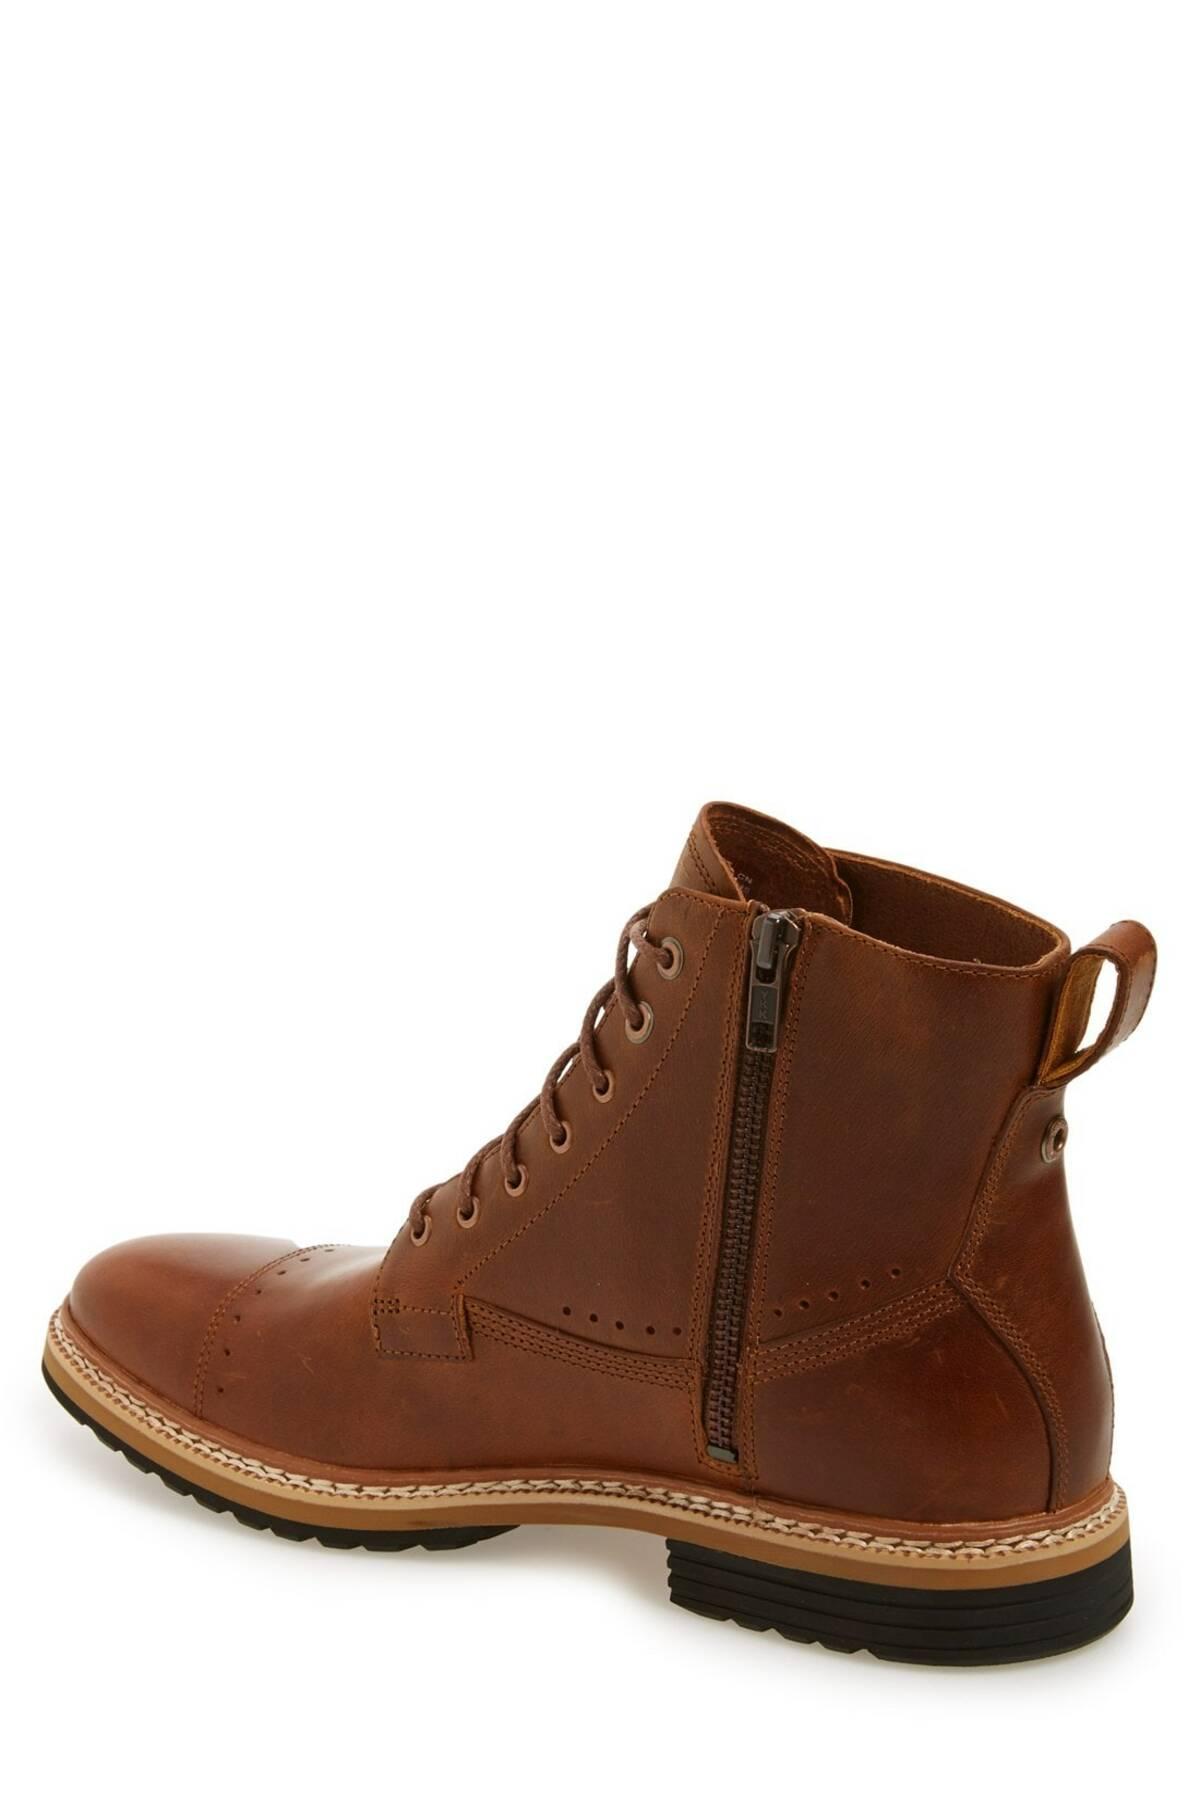 timberland westhaven